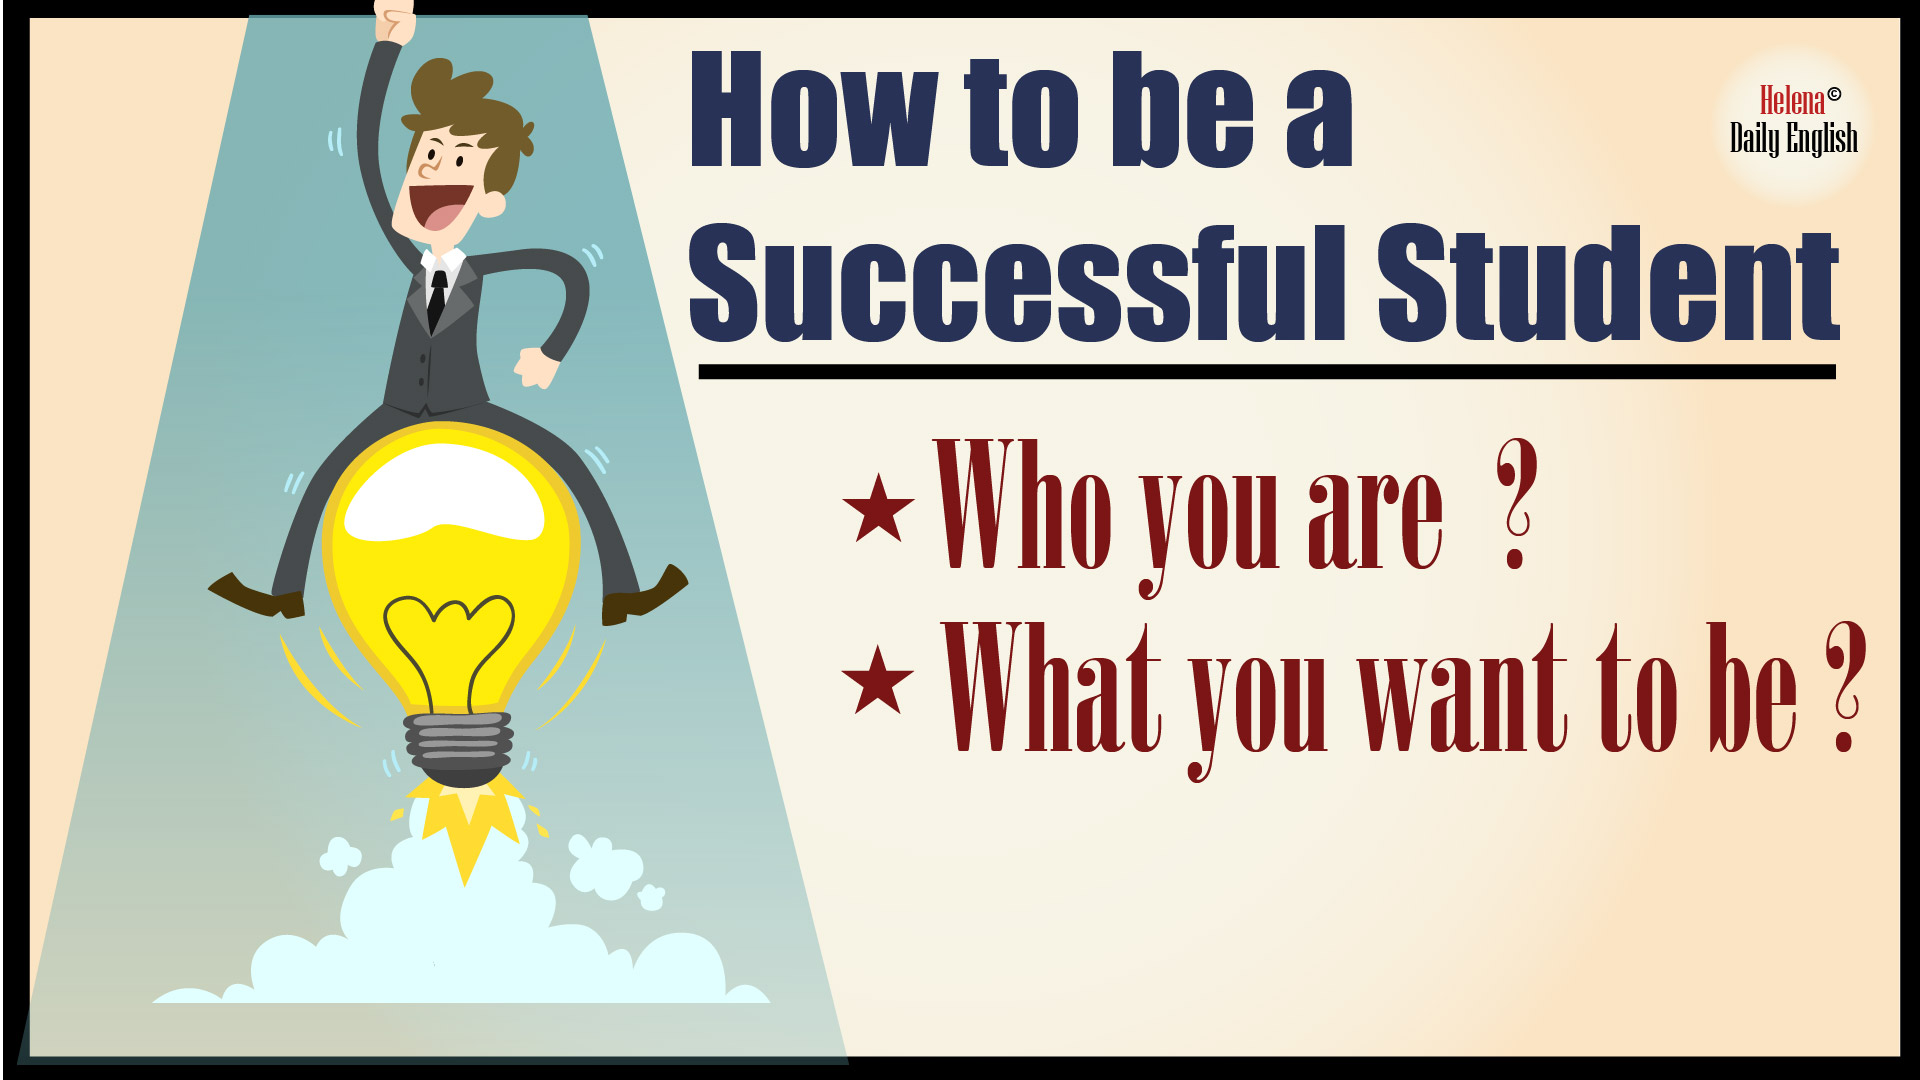 Student speech. How to be a successful student. Картинки how to be successful. Предложения с successful. How to be successful надпись.